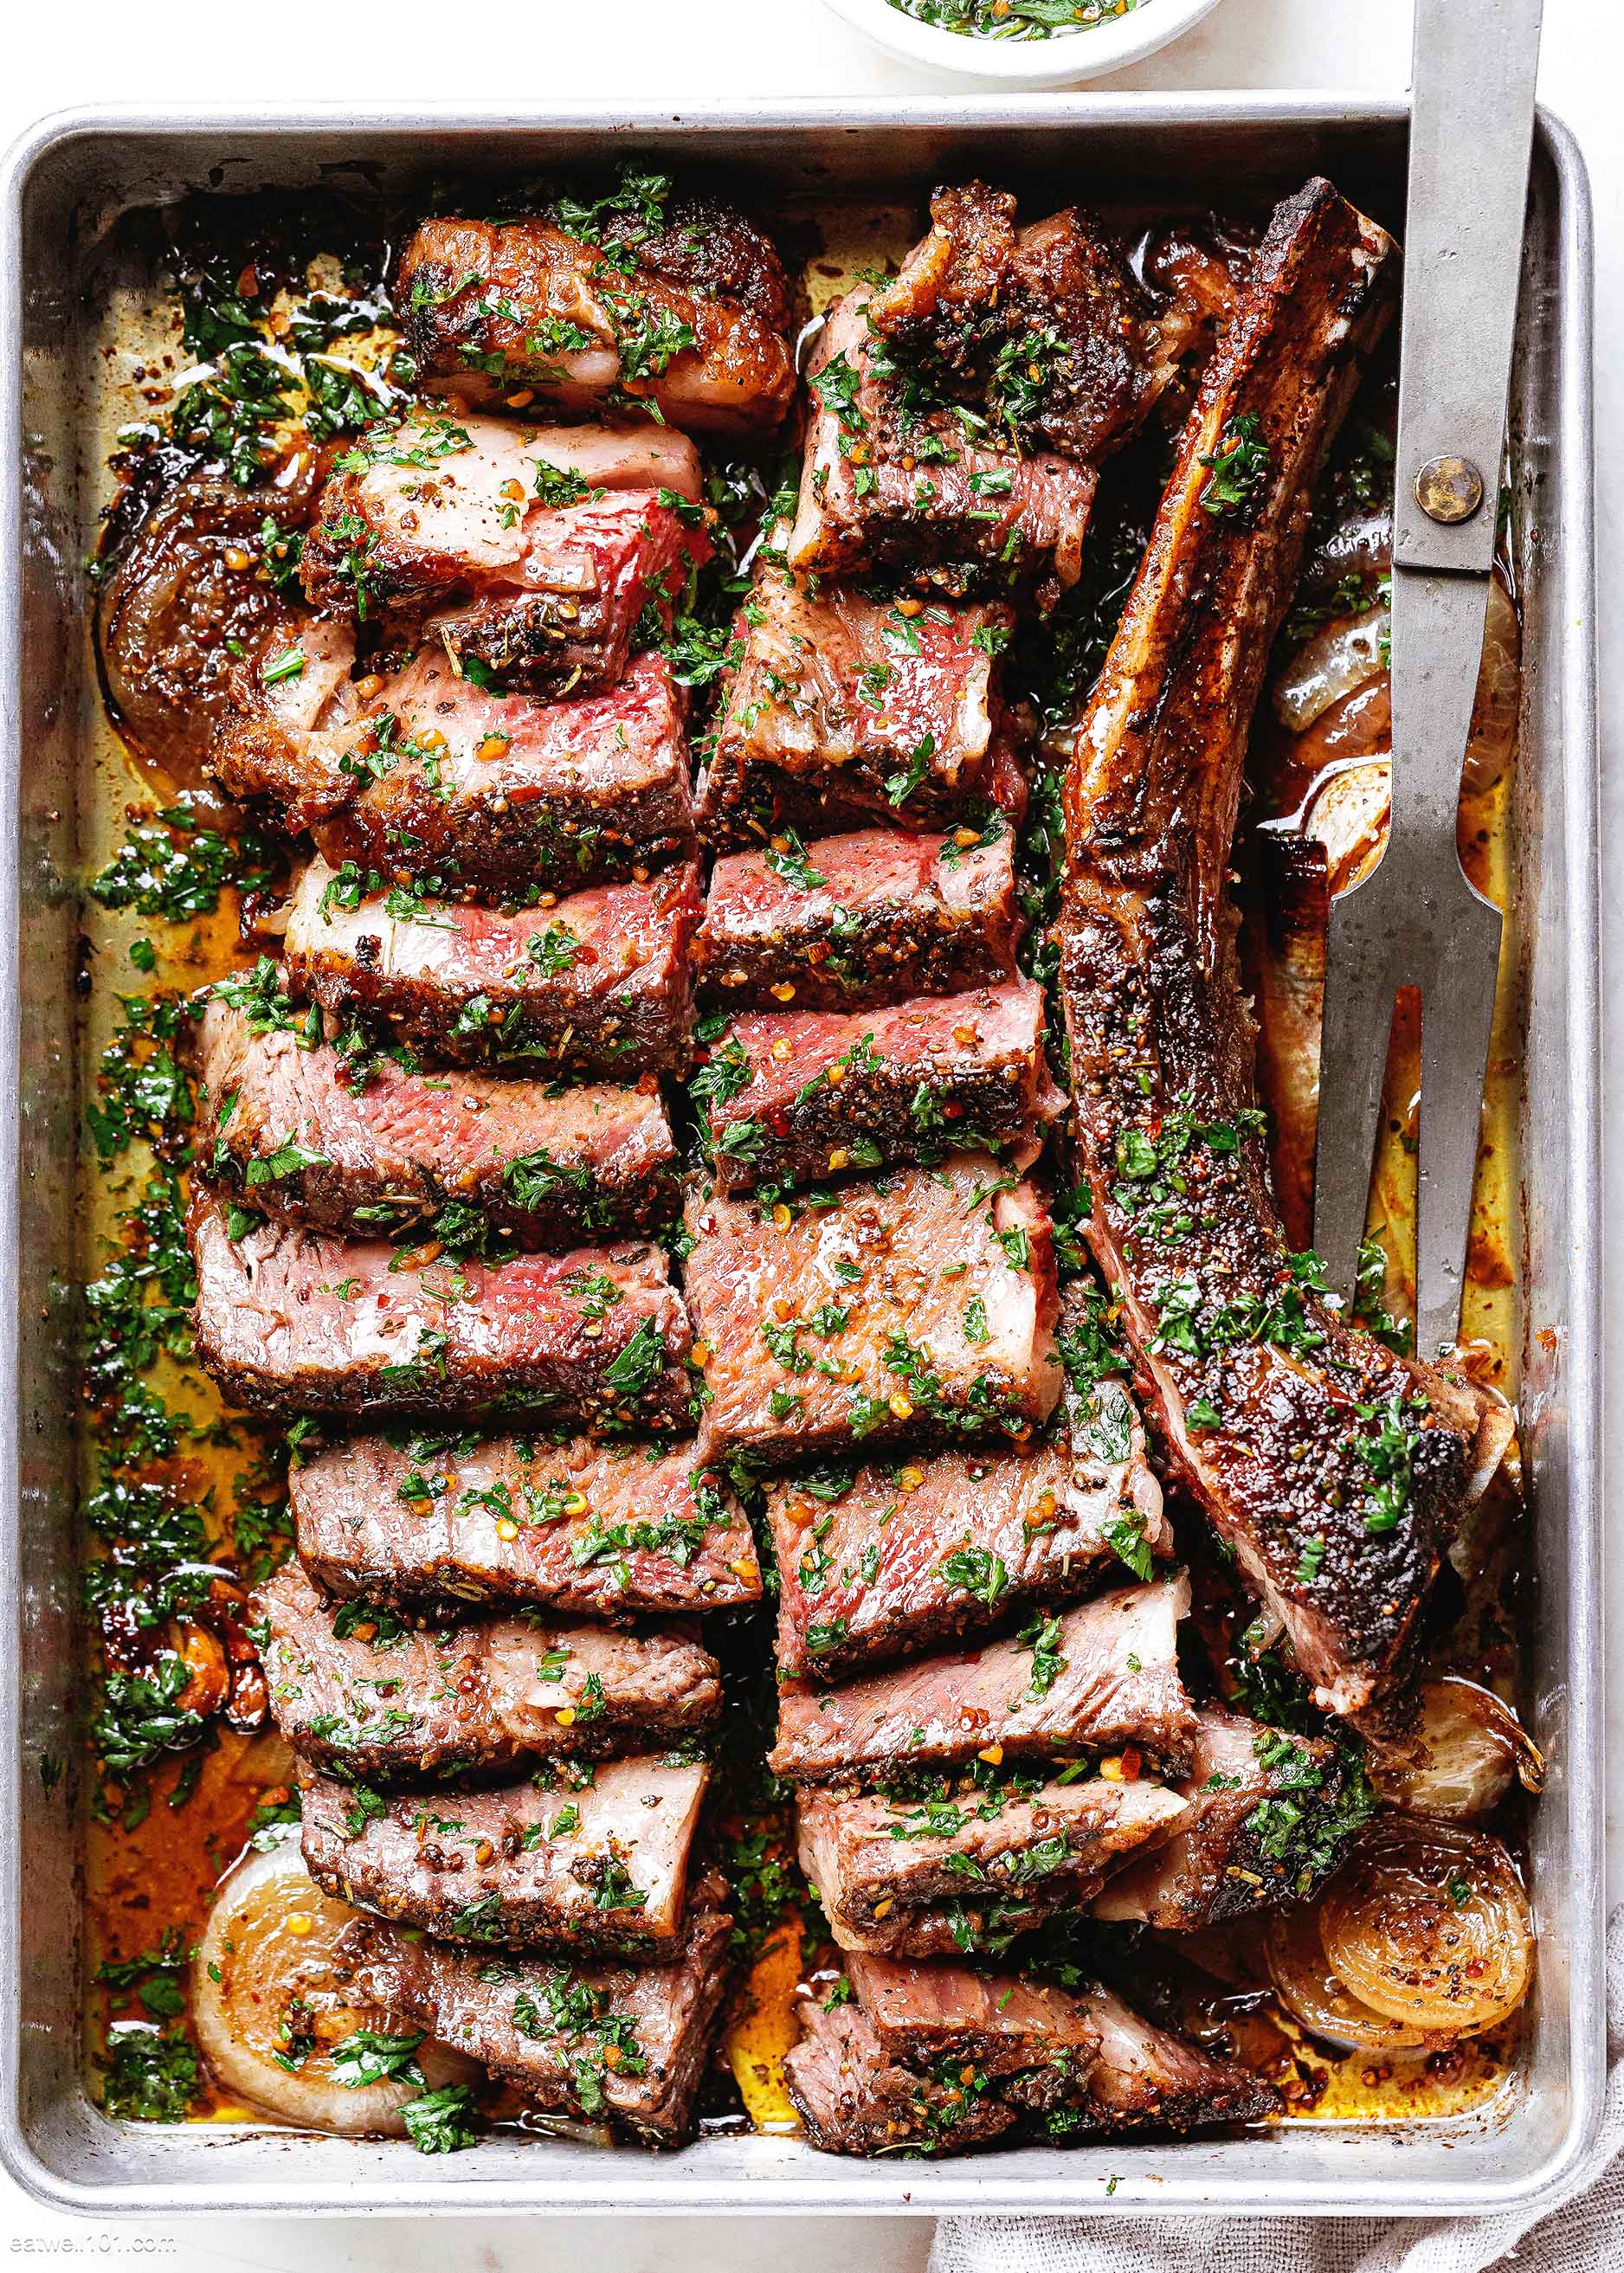 Easy Oven Grilled Steak Recipe  Make Perfect Steak in the Oven